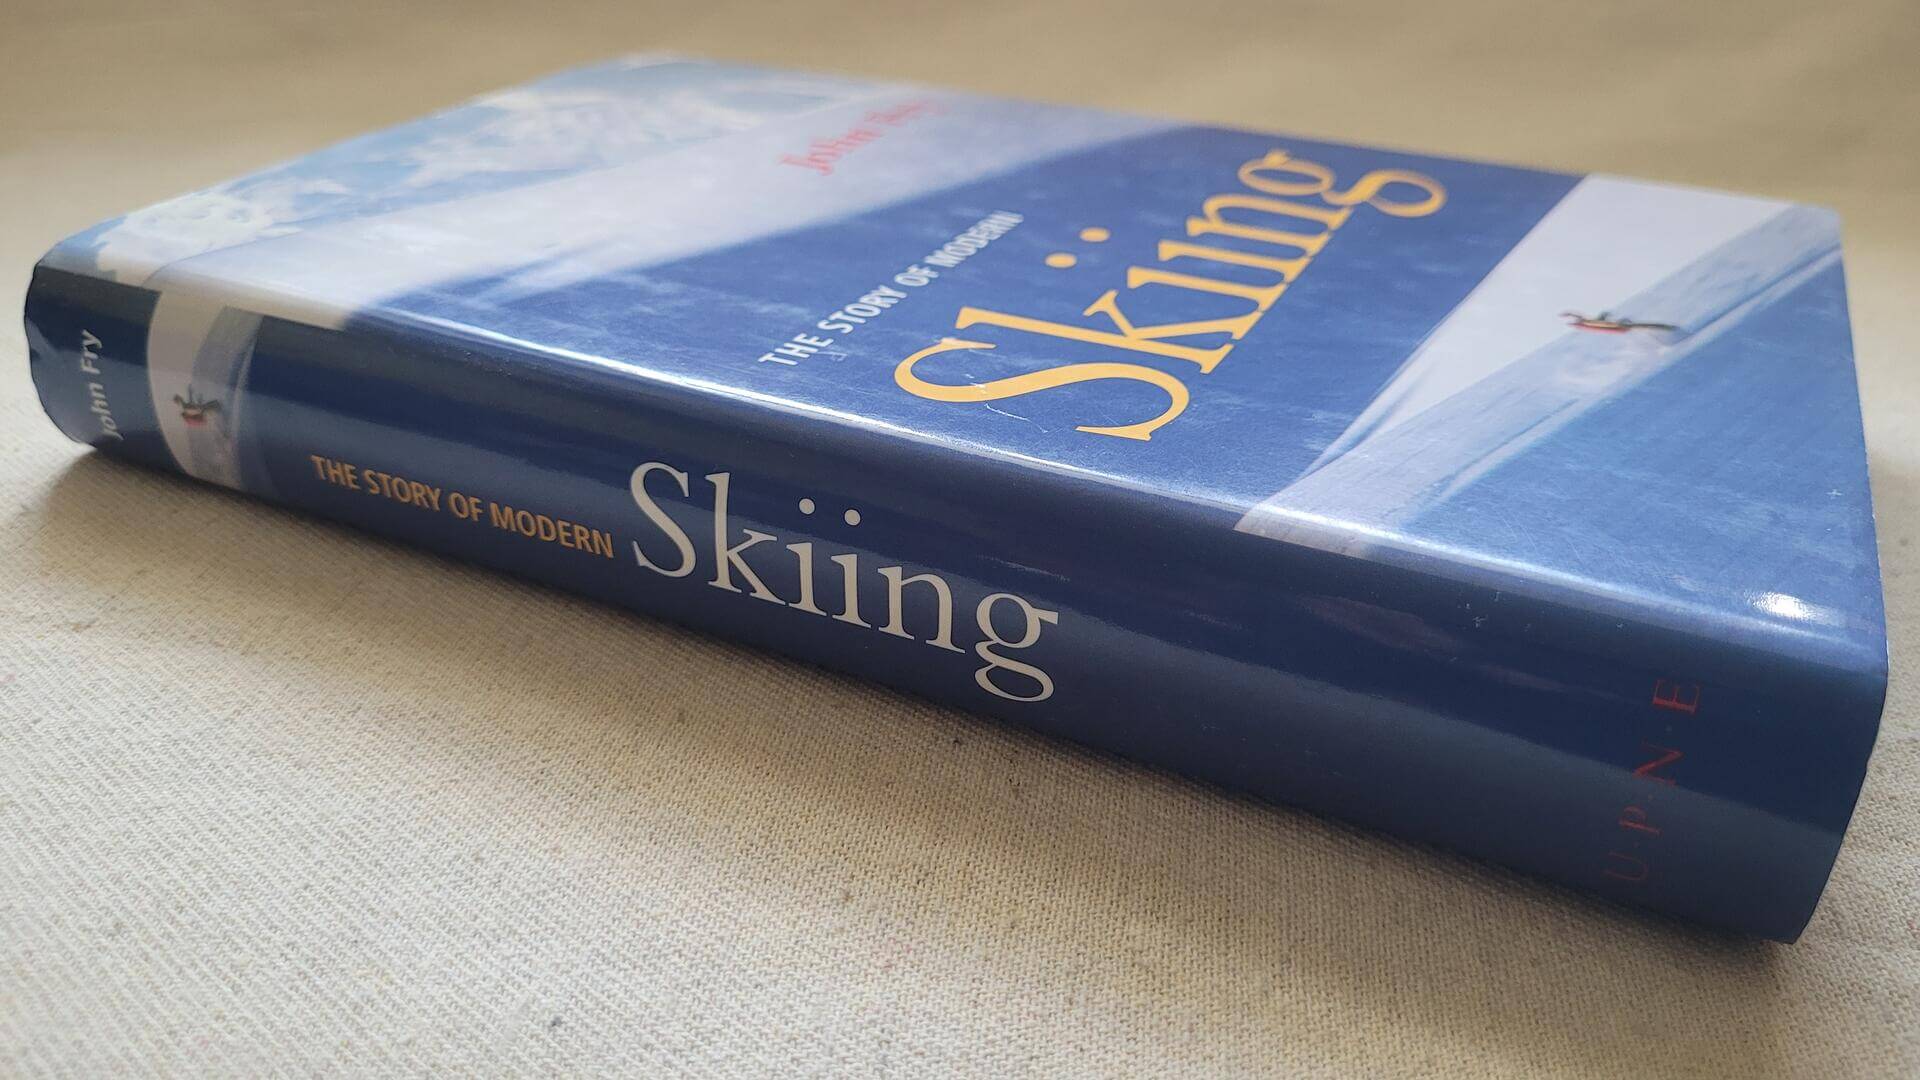 story-of-modern-skiing-book-by-john-fry